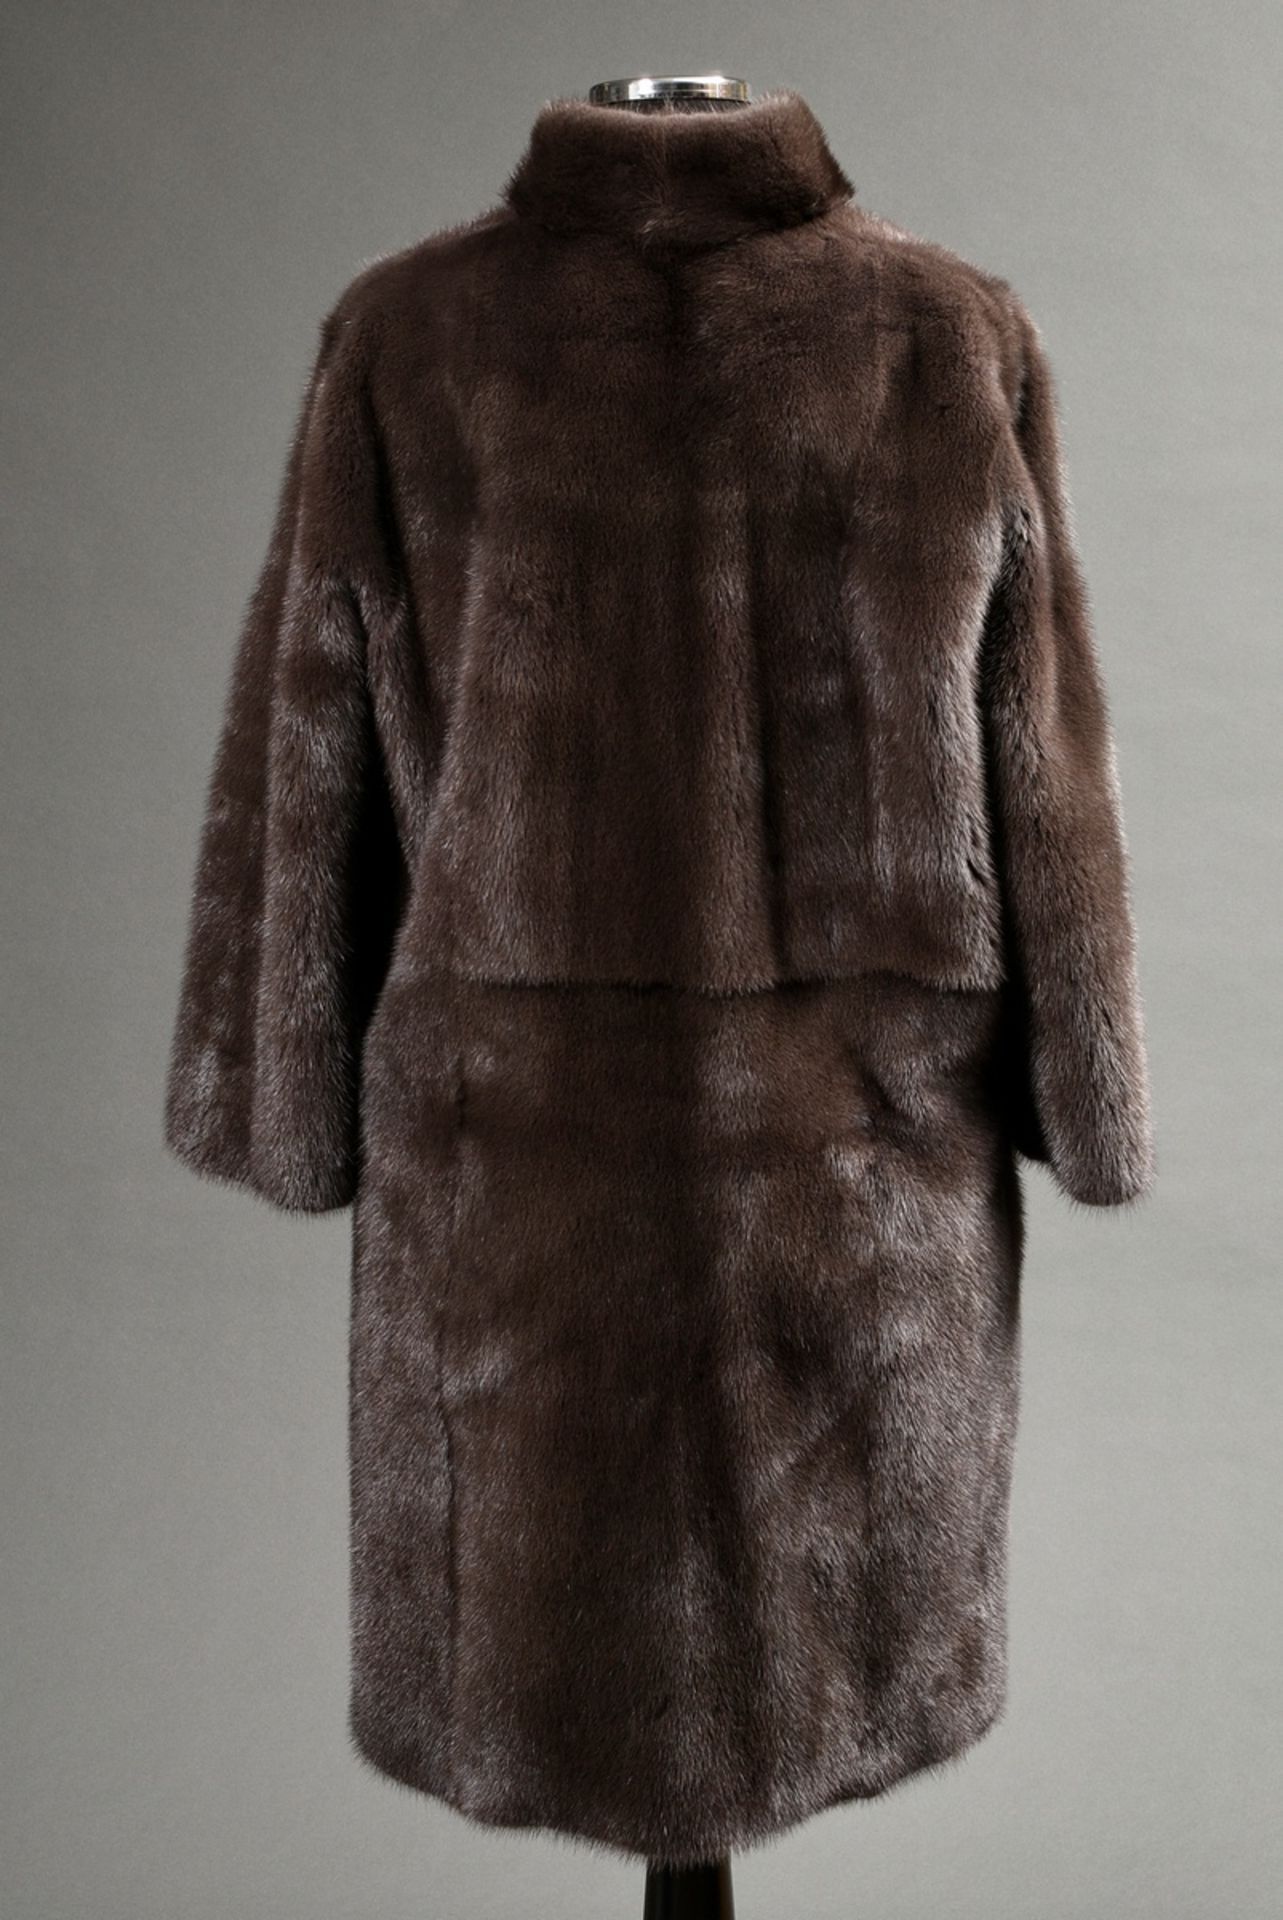 Fashionable Manzoni24 mink reversible coat with three-quarter sleeves and attached pockets on both  - Image 3 of 4